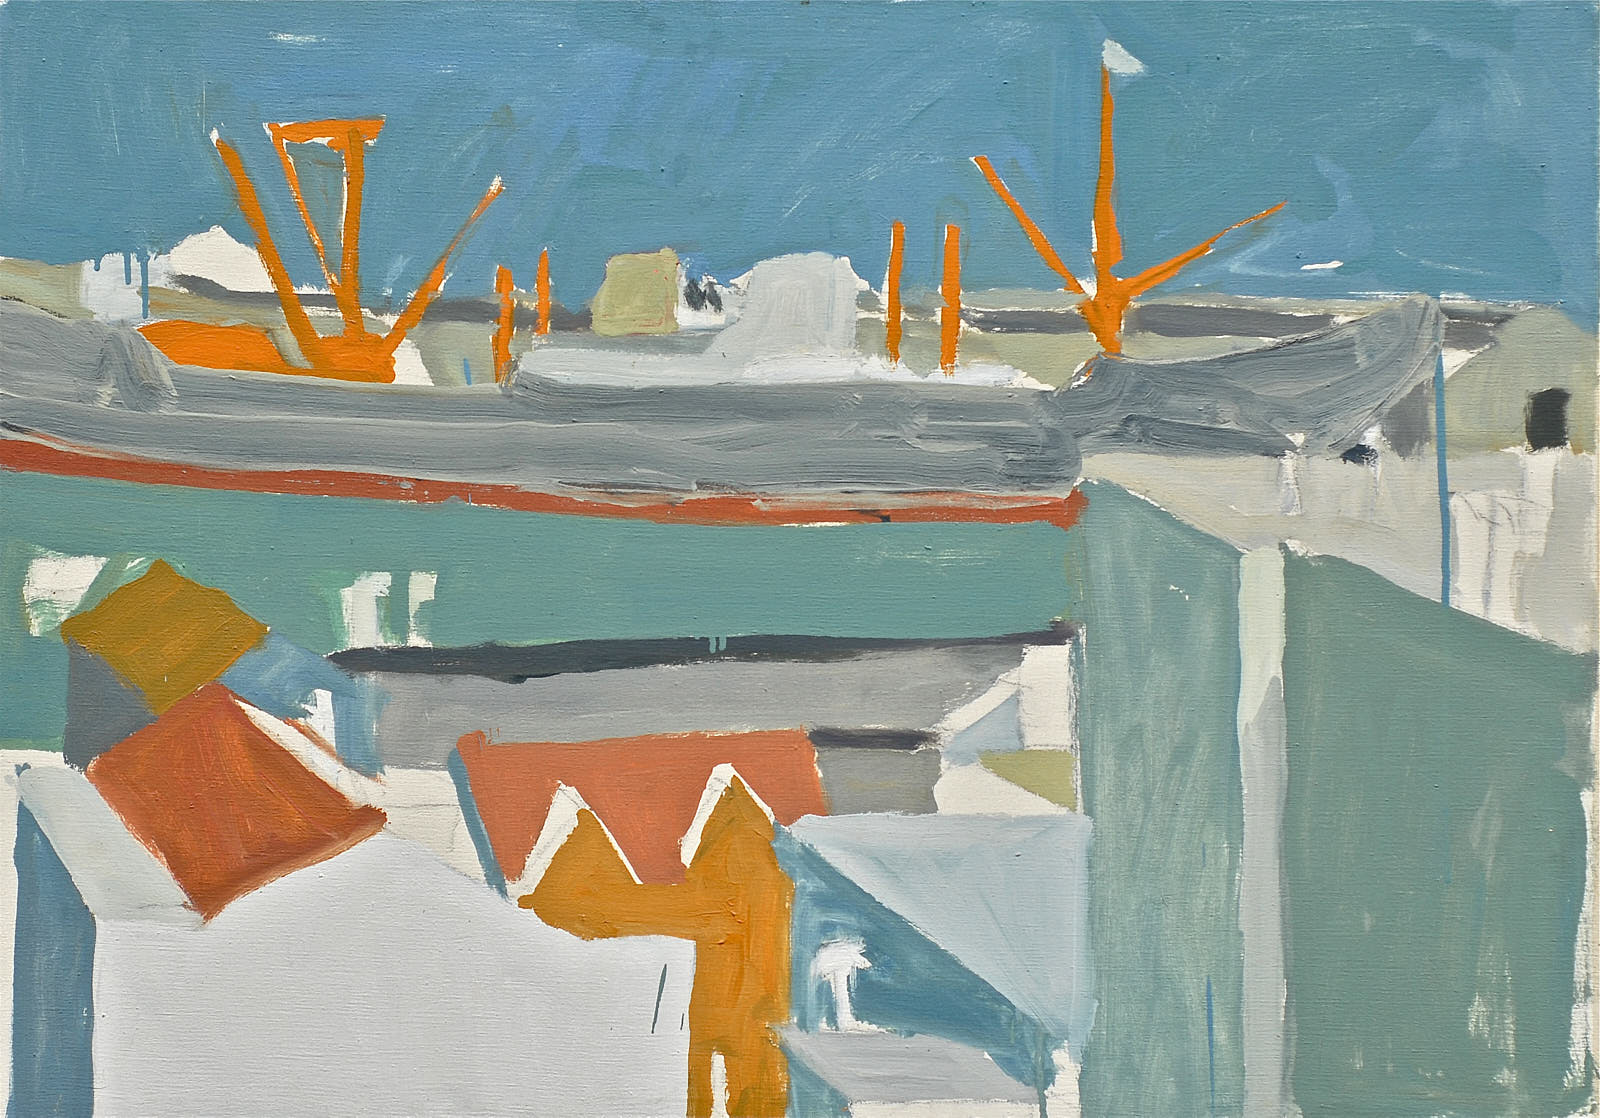 Ellen Baake, 1964 oil on canvas. 28 x 39'' private collection